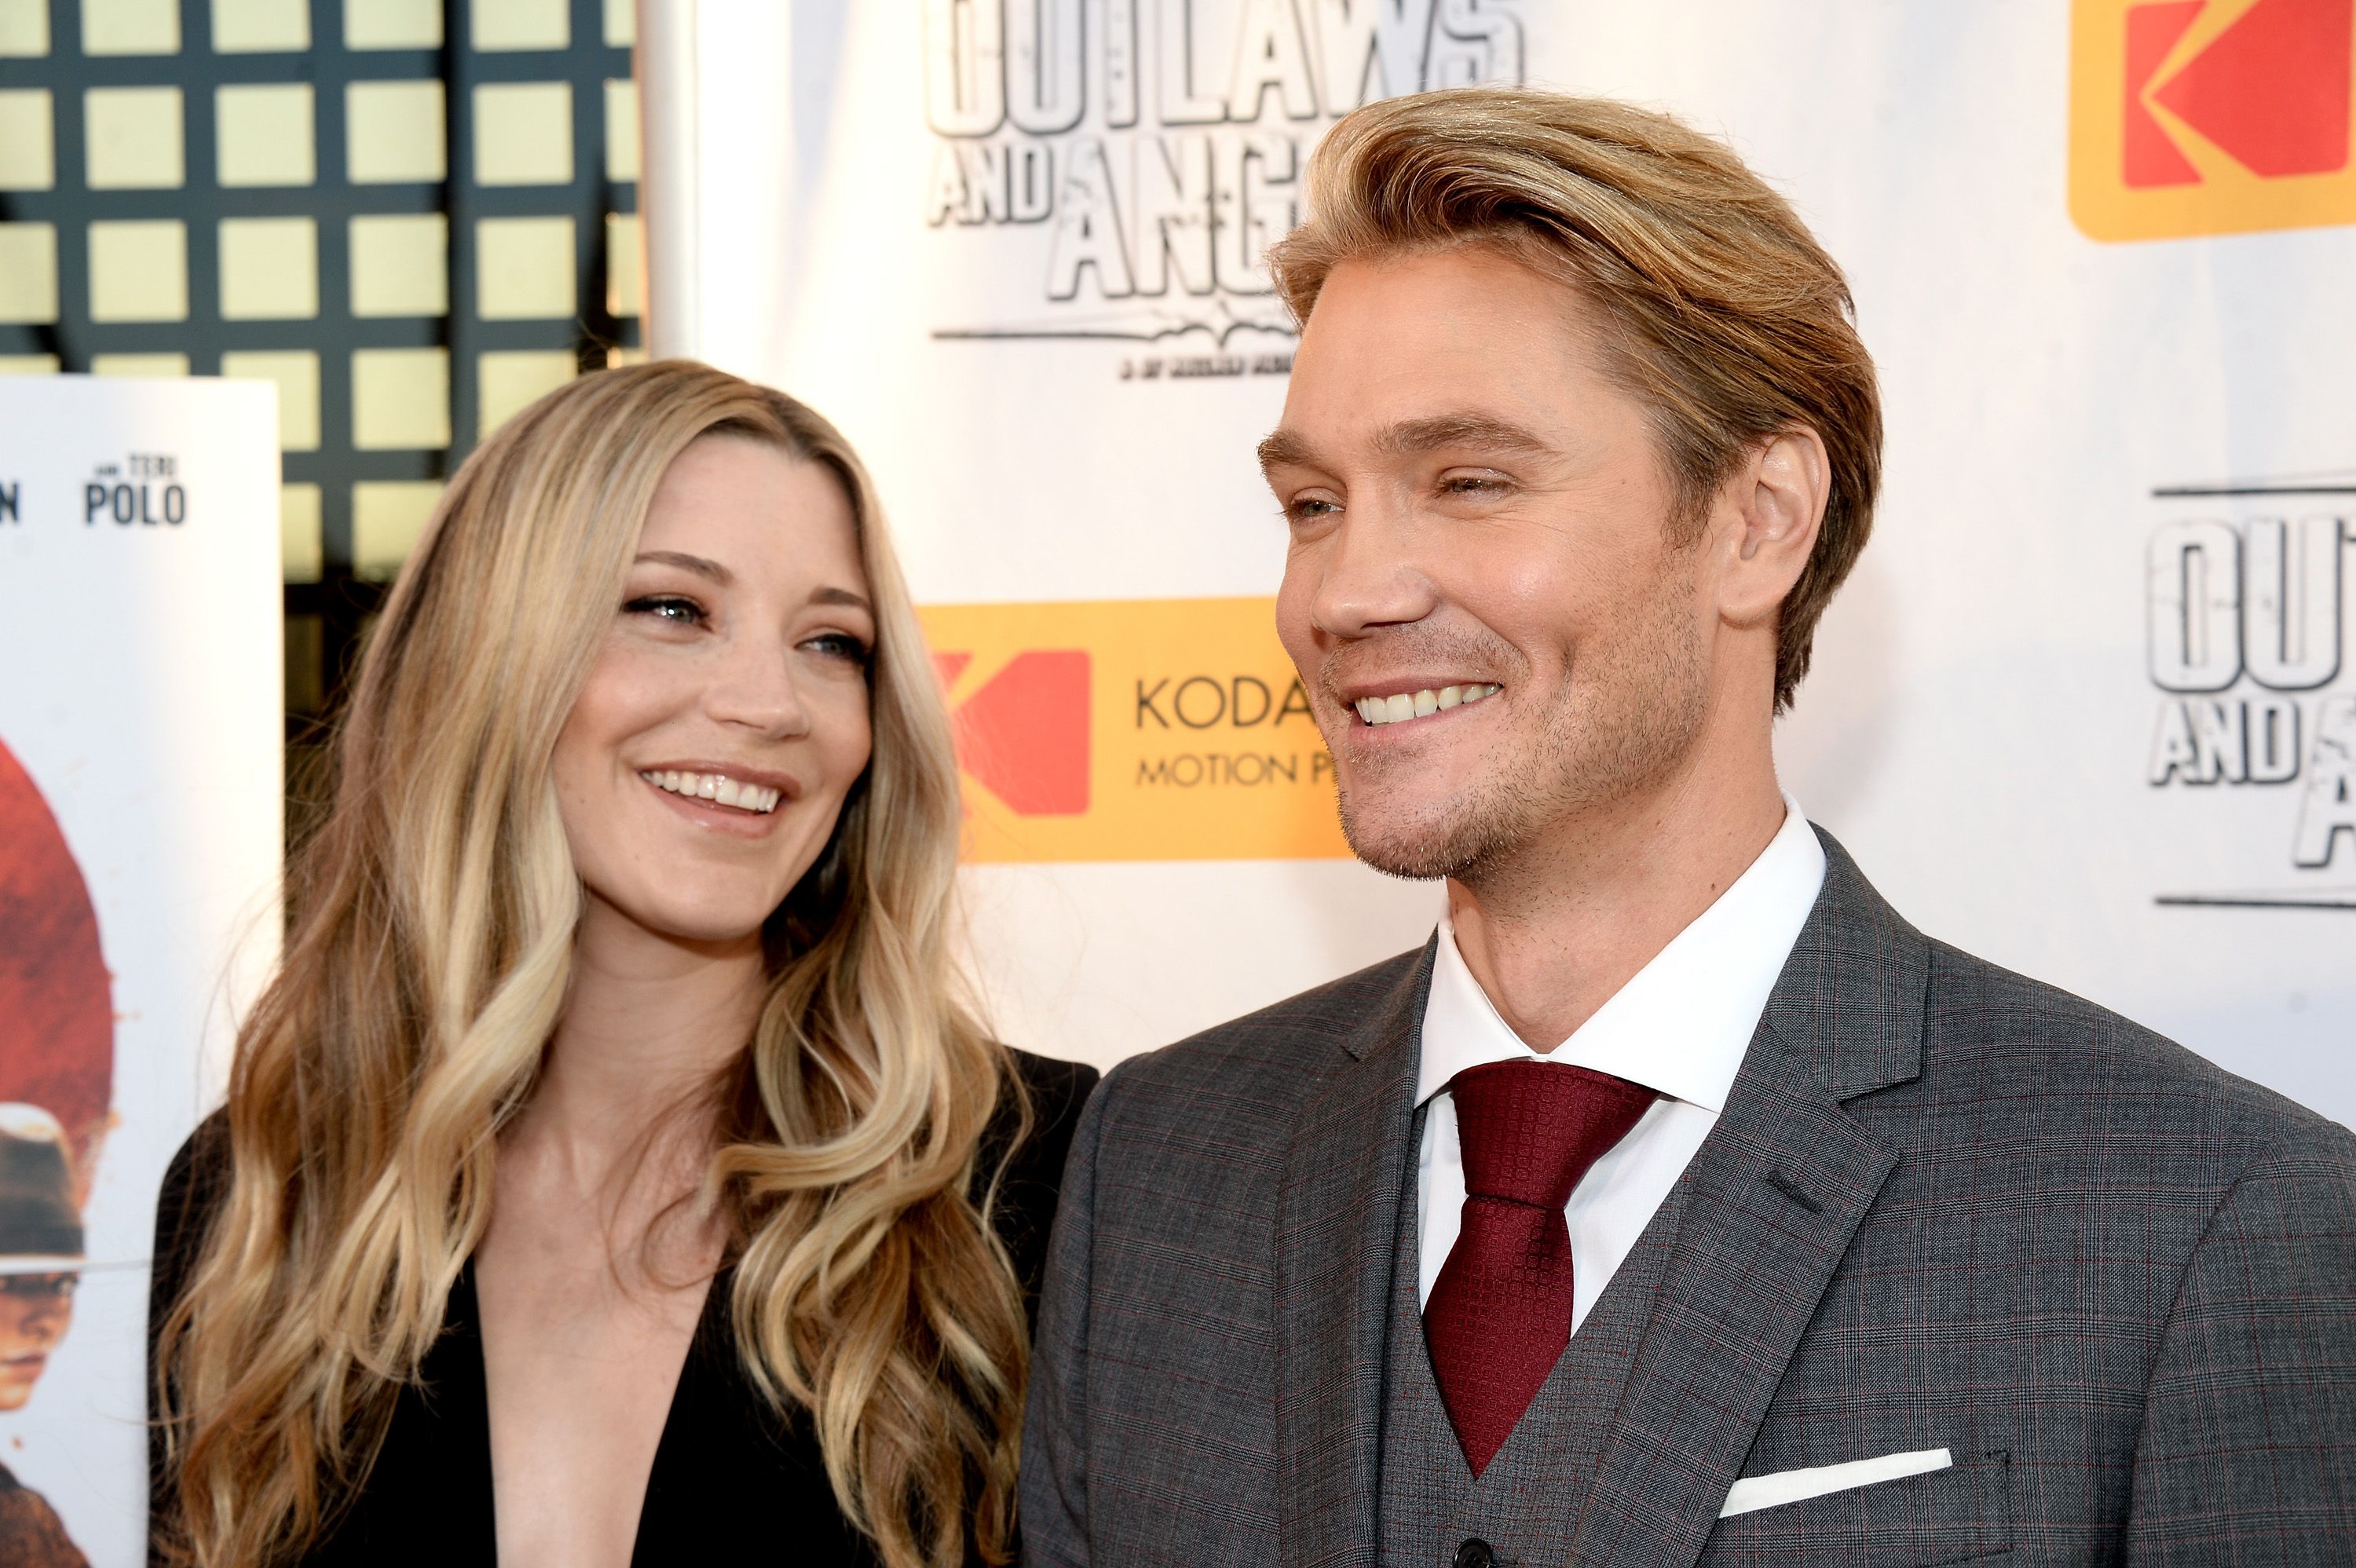 Who is chad michael murray dating now